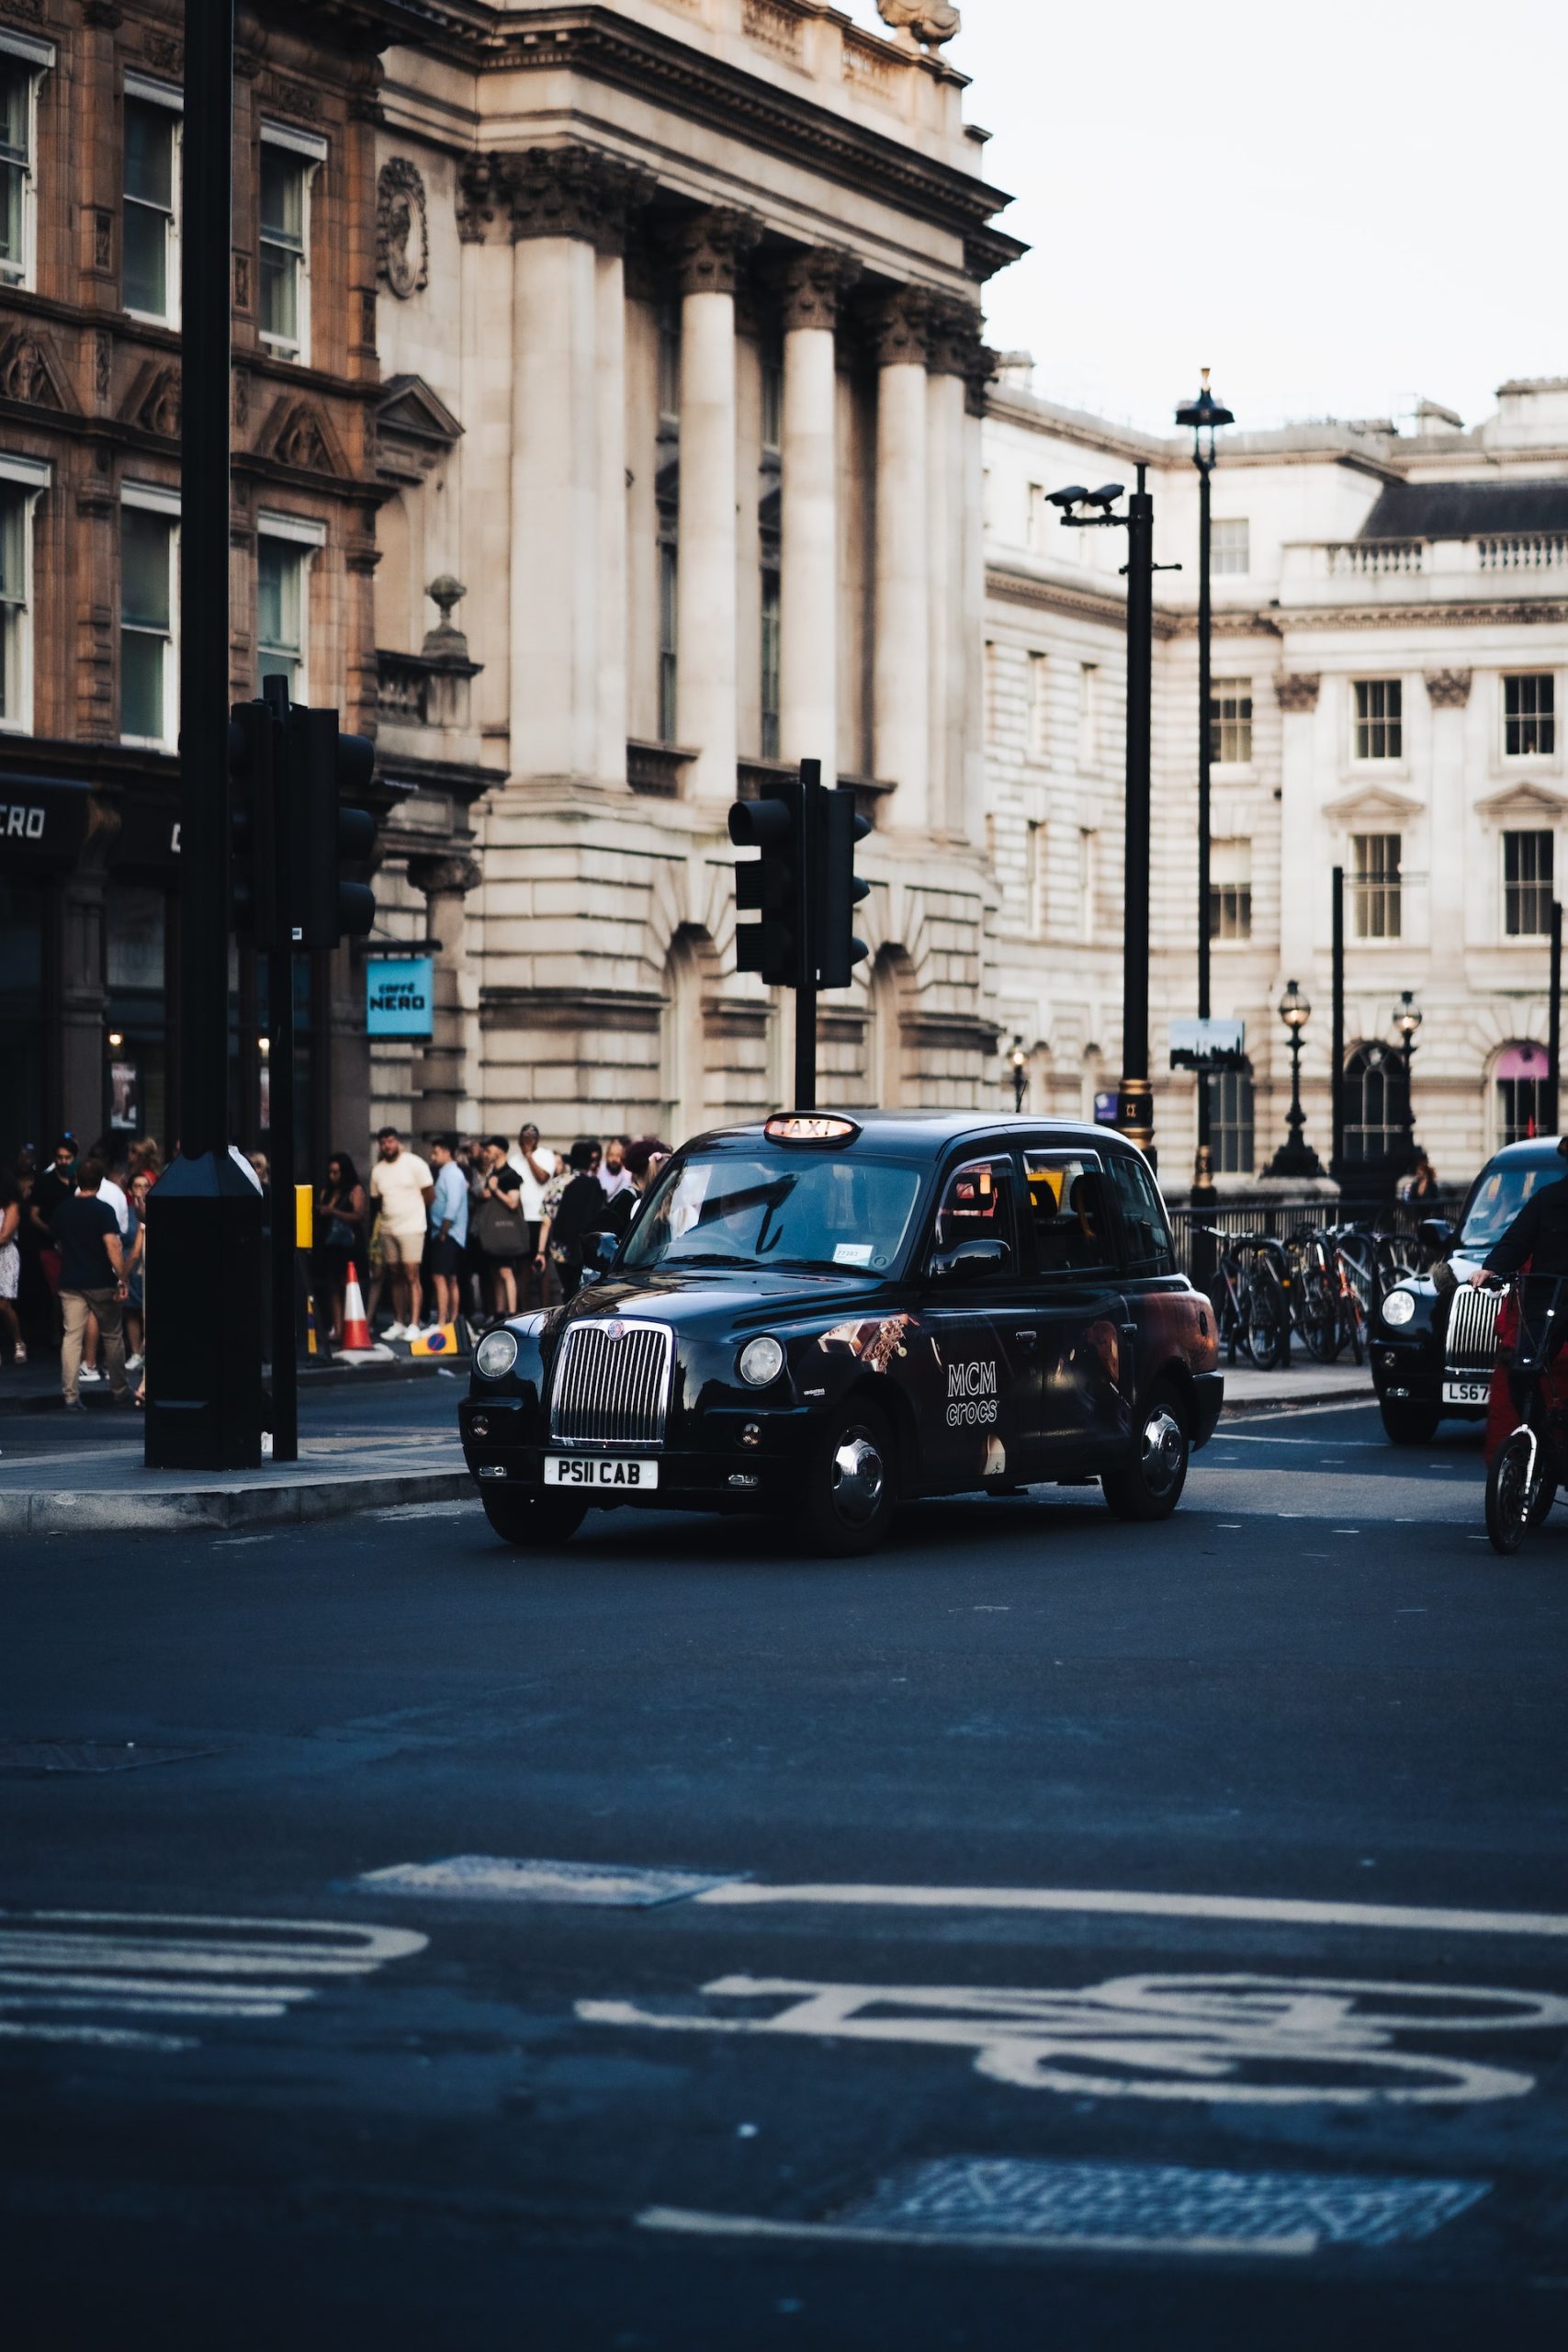 Image of London street with black London taxi in motion